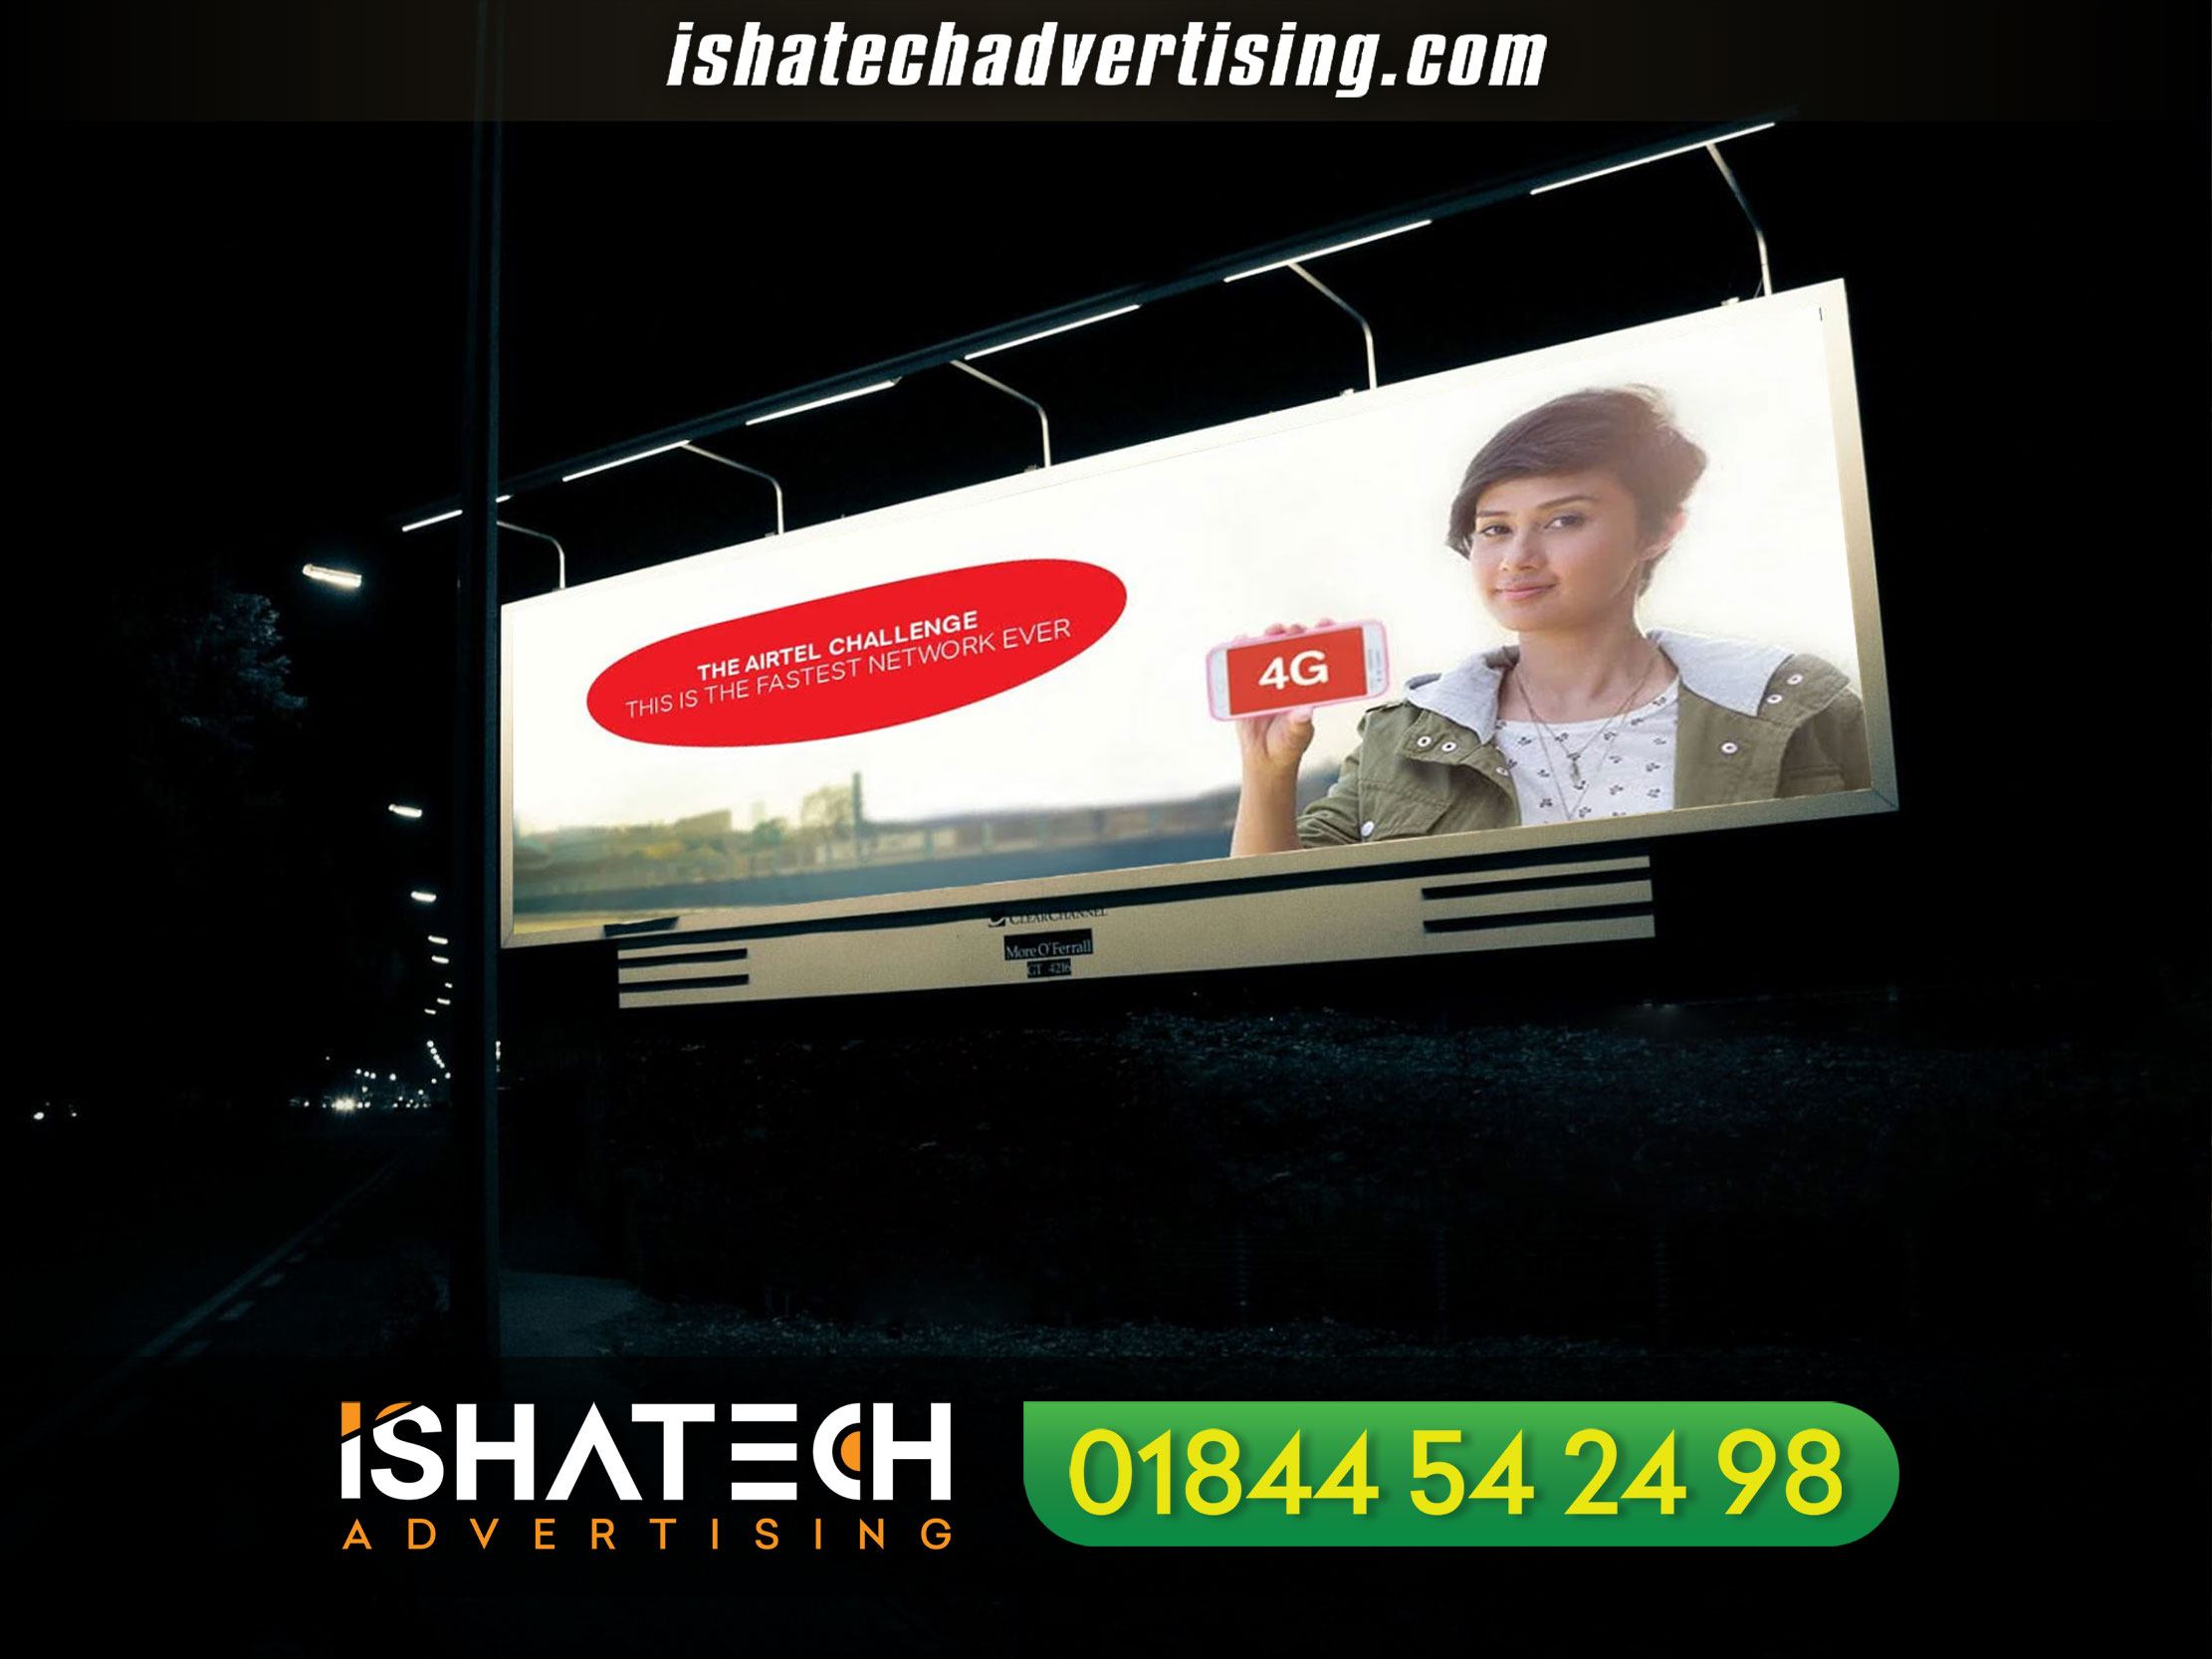 Product Advertising Billboard, Billboard Rental Service in Dhaka Bangladesh, Best led signboard BD, Project Billboard, Real estate billboard making in Dhaka BD, Best Led signboard making company, signboard bd, Billboard bd, Project Billboard Advertising Steel Billboard Structure Steel Board Outdoor Signage, All Kind of #DigitalPrint Pana, PVC, Shop Sign, Name Plate, #Lighting Sign Board, #LEDSign, Neon Sign, Acrylic Sign, Moving Display, #Billboard, Radio Ad, #NewspaperAd, TV Ad, #FairStall & Event #Management Ad Etc. Hope You’re Interest! #neonsign #signboard #eventmanagement #signage #stall #digitalprint #sign #display #board #acrylic #neon #plate #ledsign #lighting #printing #graphicdesign #service #marketing #ad #branding #print #advertising #BillBoard #DigitalBoard #SteelBoard #LocalBoard #StandBoardNonlitBoard #Structure #Structural. top billboard advertising agency in dhaka bangladesh. top 10 billboard advertising agency in dhaka bangladesh. list of billboard advertising agency in dhaka bangladesh. billboard advertising agency in dhaka bangladesh price. best billboard advertising agency in dhaka bangladesh. billboard advertising cost in bangladesh. billboard advertising bd. billboard rent in dhaka. Cement Company Billboard Making And Branding in Dhaka Bangladesh, Best Led Signboard Making Company in Dhaka Bangladesh, Billboard Ads, Billboard Ads Pro, Billboard Making BD, Best Led Signboard Making in Dhaka Bangladesh. Signboard BD, Billboard Rental Company in Dhaka Bangladesh. Wall Billboard Making, Side Billboard Rental service in Dhaka BD, Billboard Making By iron structure in Dhaka Bangladesh, Billboard Structure for branding my products in Dhaka Bangladesh, Signboard BD, Billboard BD, Best Led Advertising Agency in Dhaka Bangladesh,